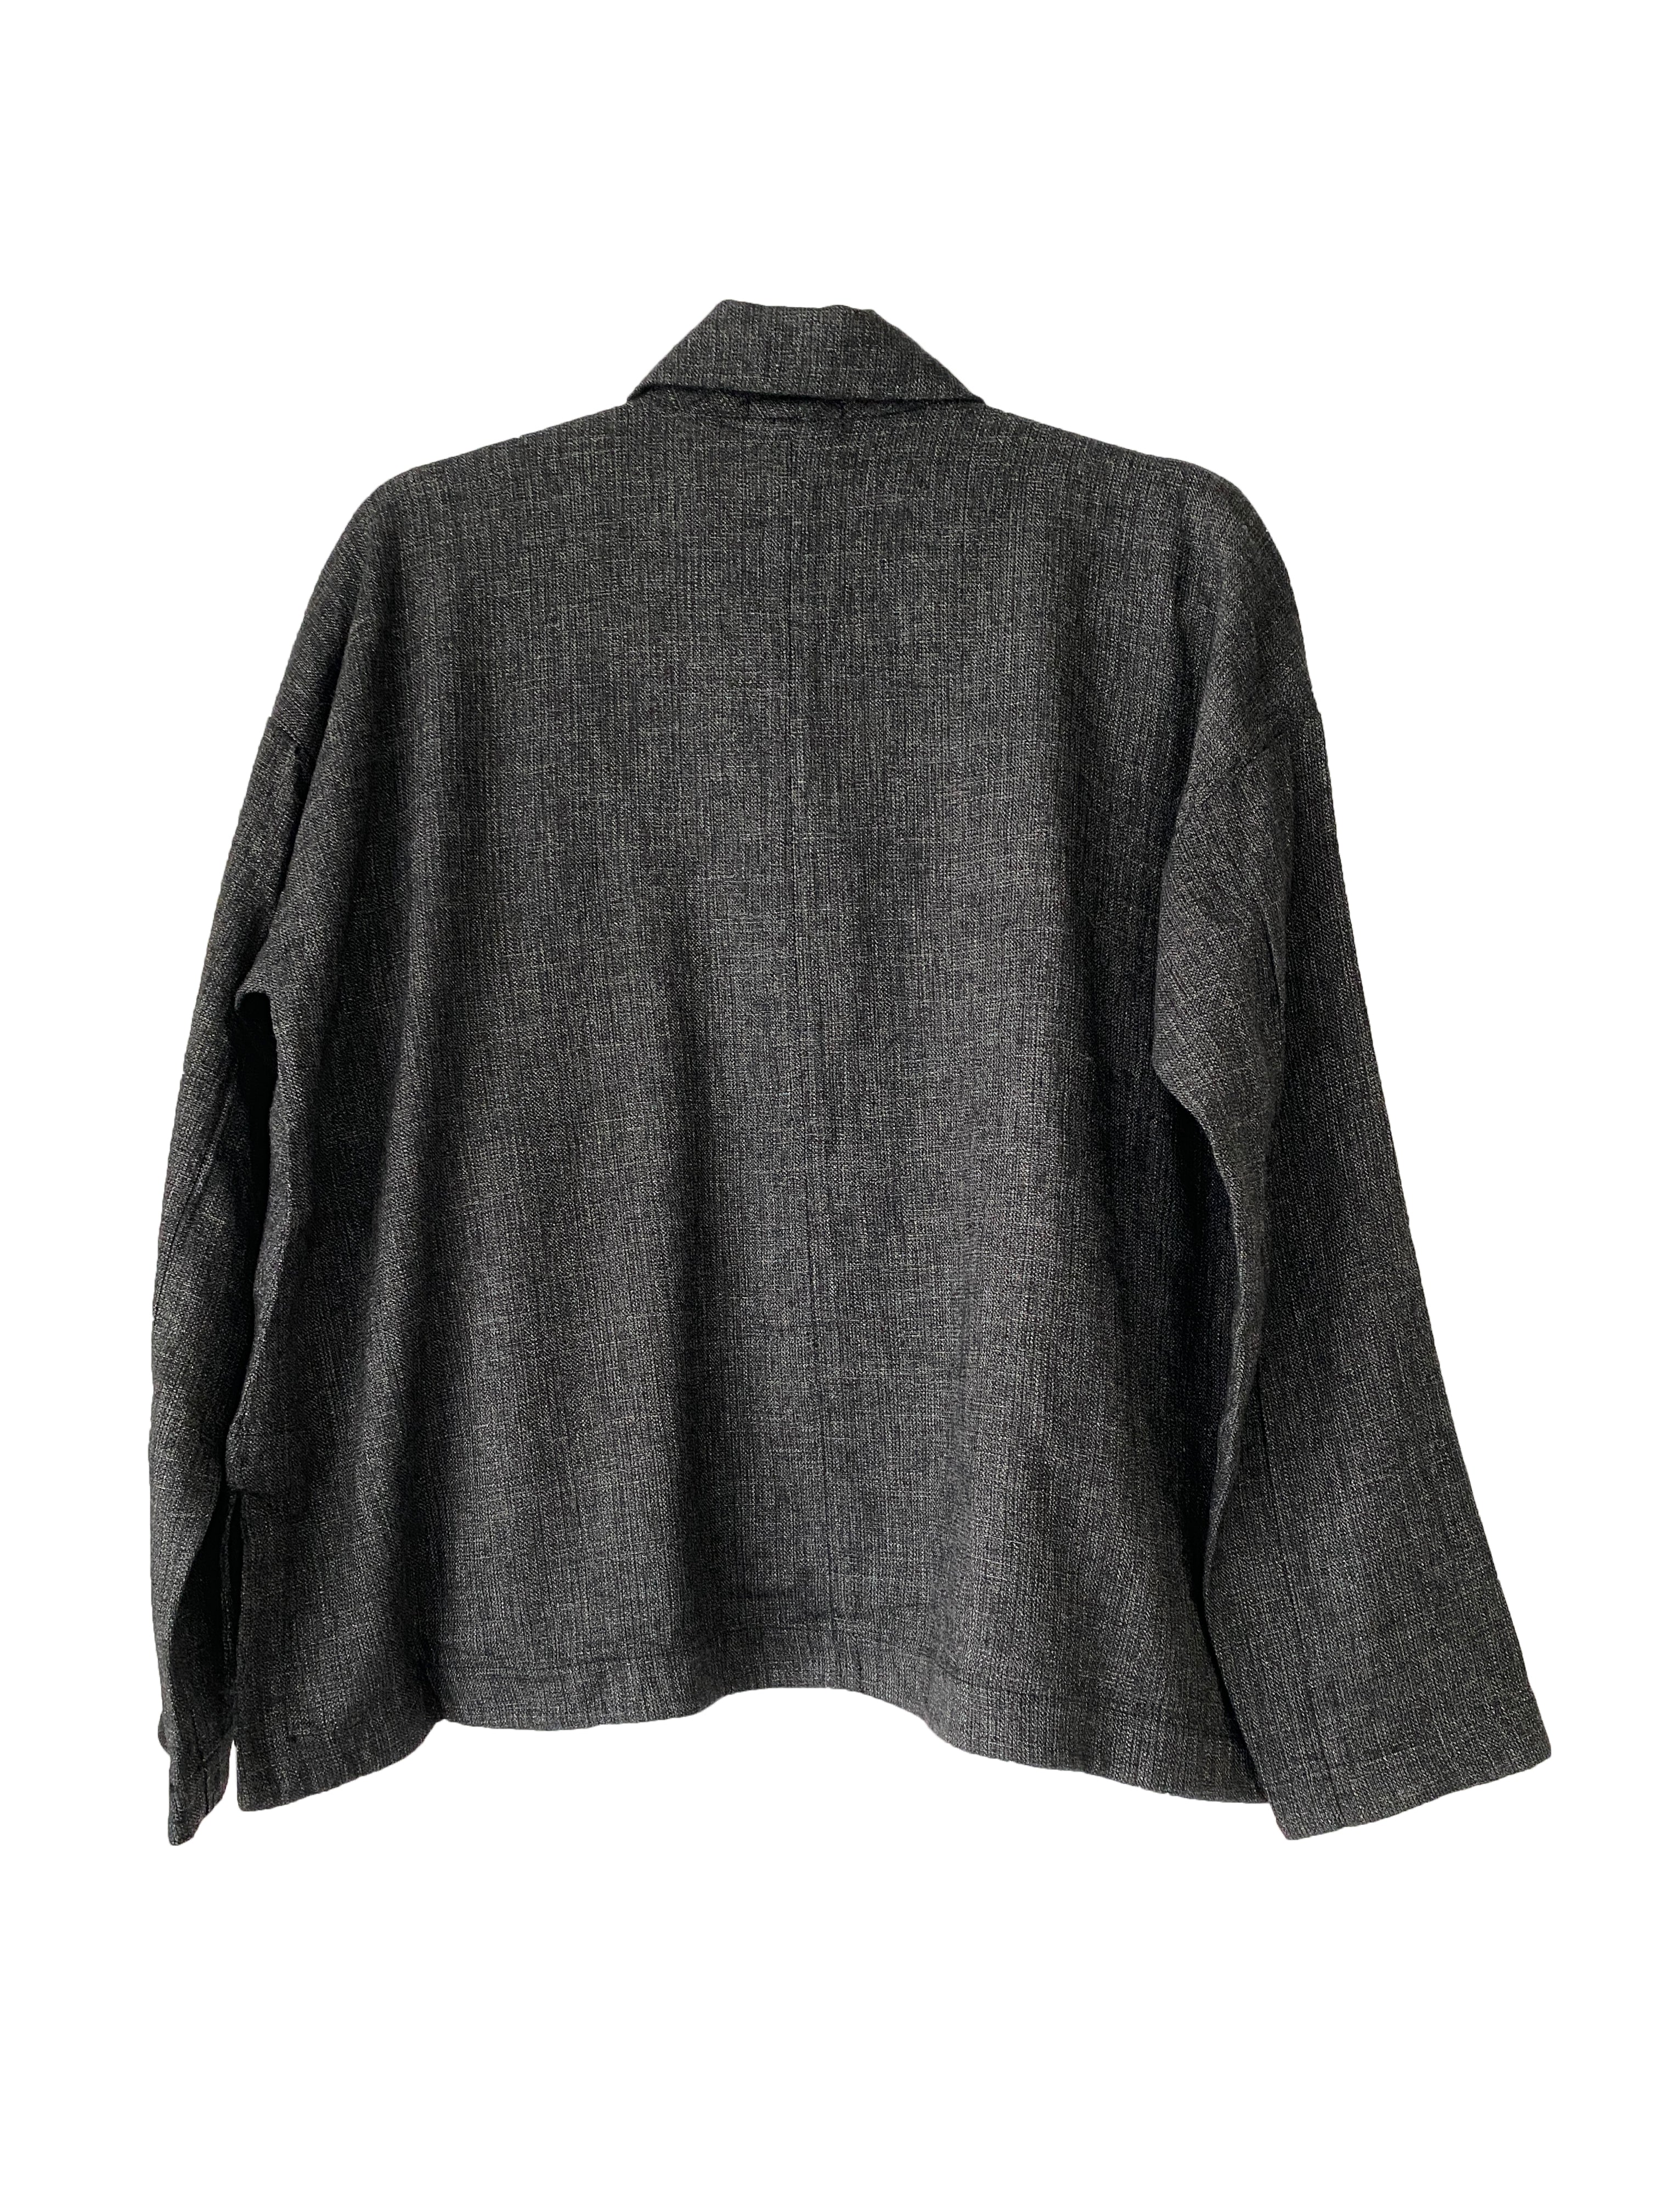 RELAXED JACKET CHARCOAL